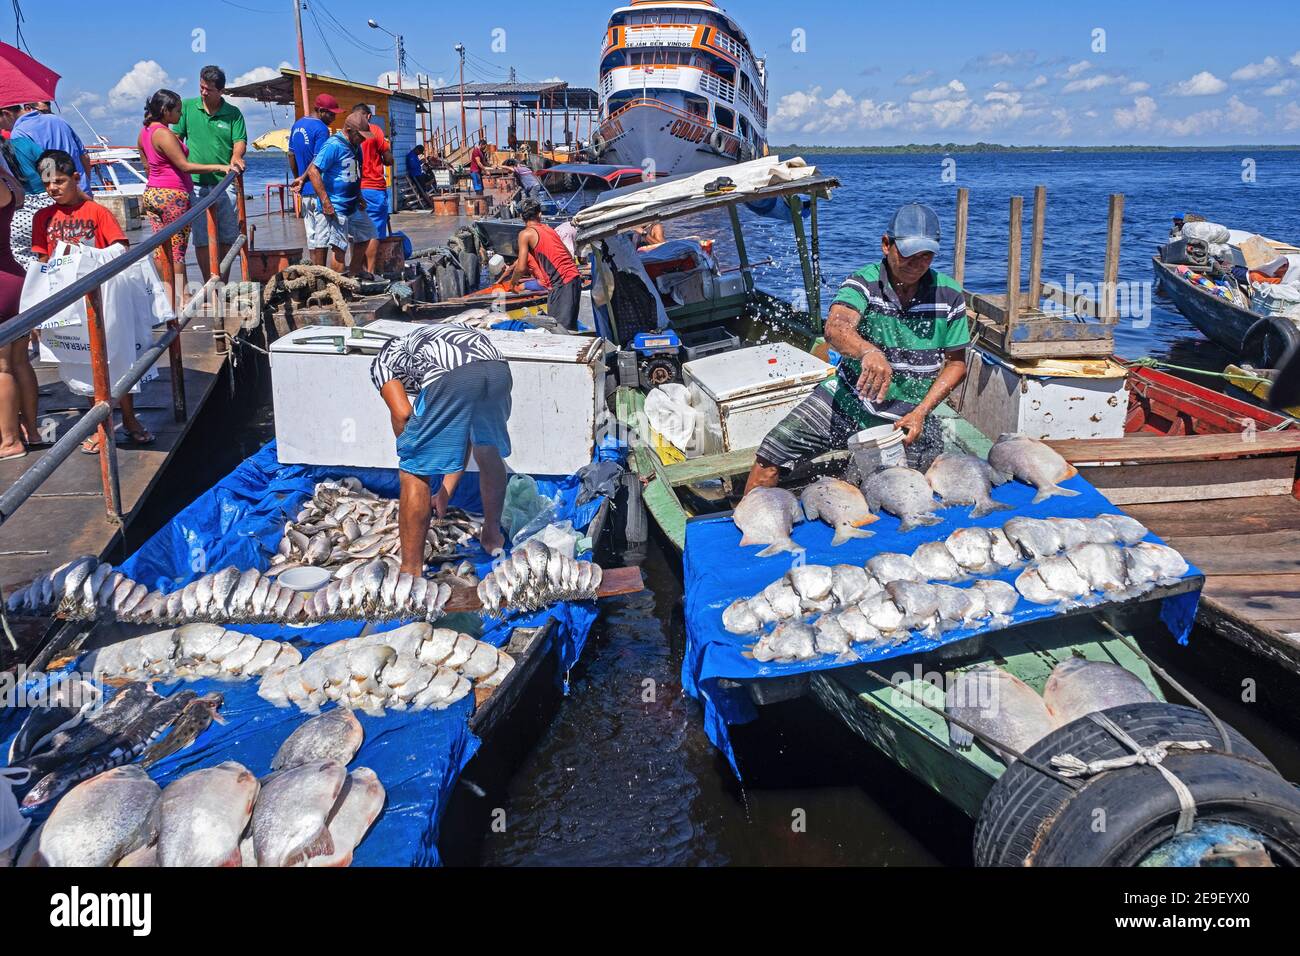 Fishermen selling piranhas and other fishes from fishing boats in the harbour / port on the Rio Negro at Manaus, Amazonas, Brazil Stock Photo